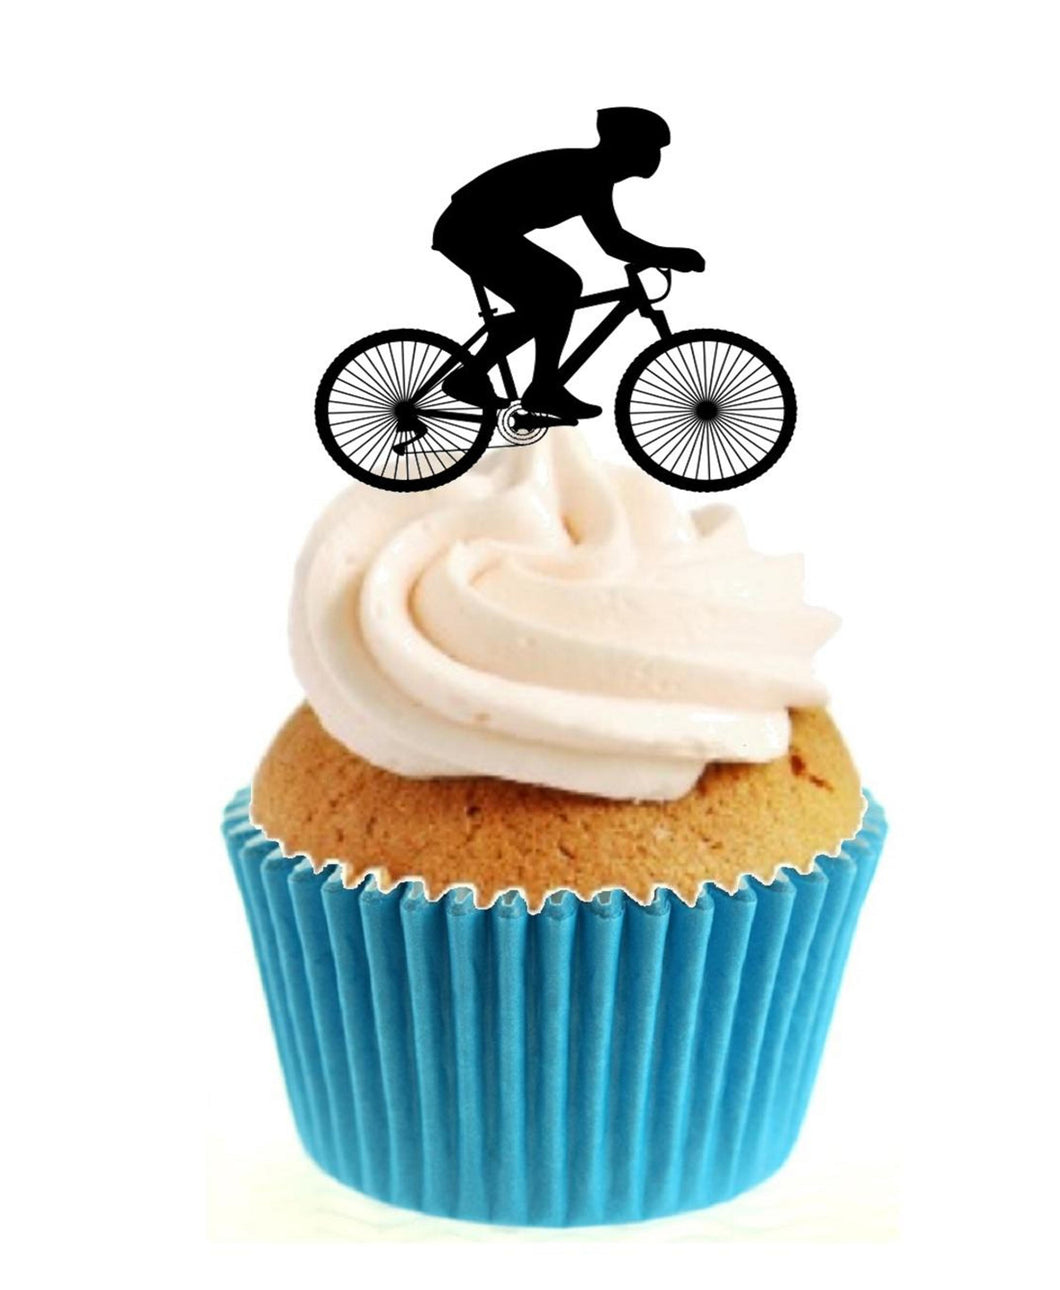 Cycling Silhouette Stand Up Cake Toppers (12 pack)  Pack contains 12 images printed onto premium wafer card